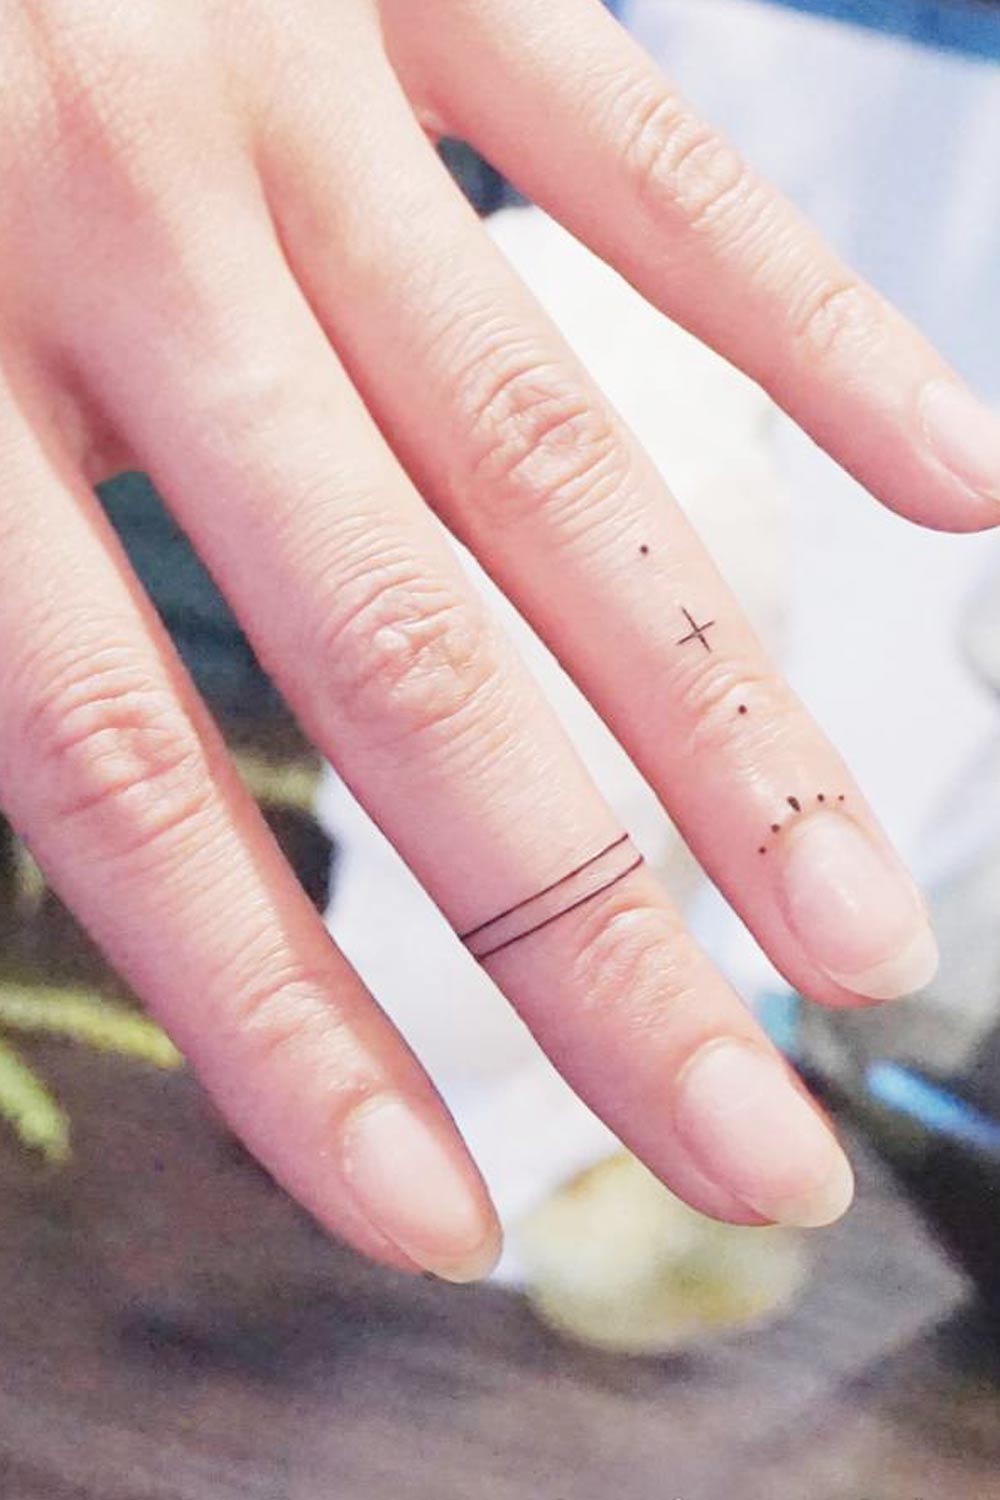 30 Meaningful Wedding Ring Tattoos for 2020 - hitched.co.uk - hitched.co.uk